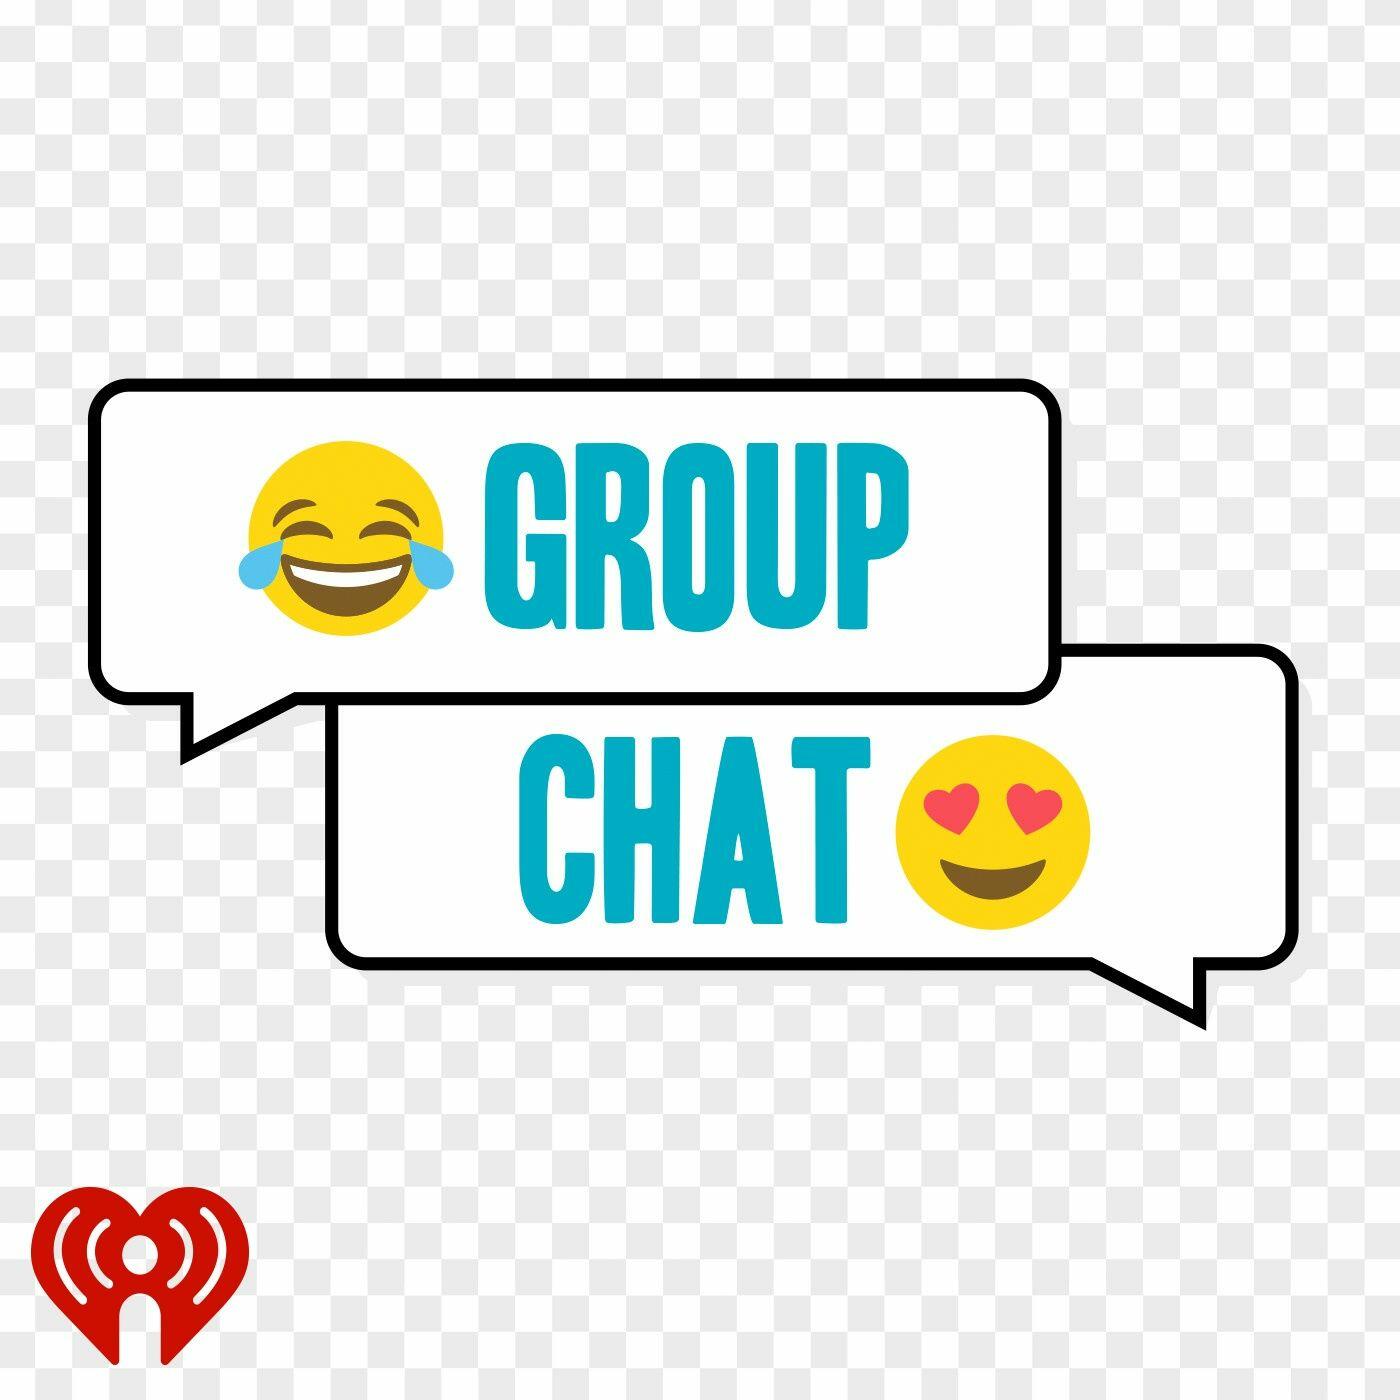 Daddy чат. Group chat. The Group chat Podcast. Радио чат картинка. Радио чат.